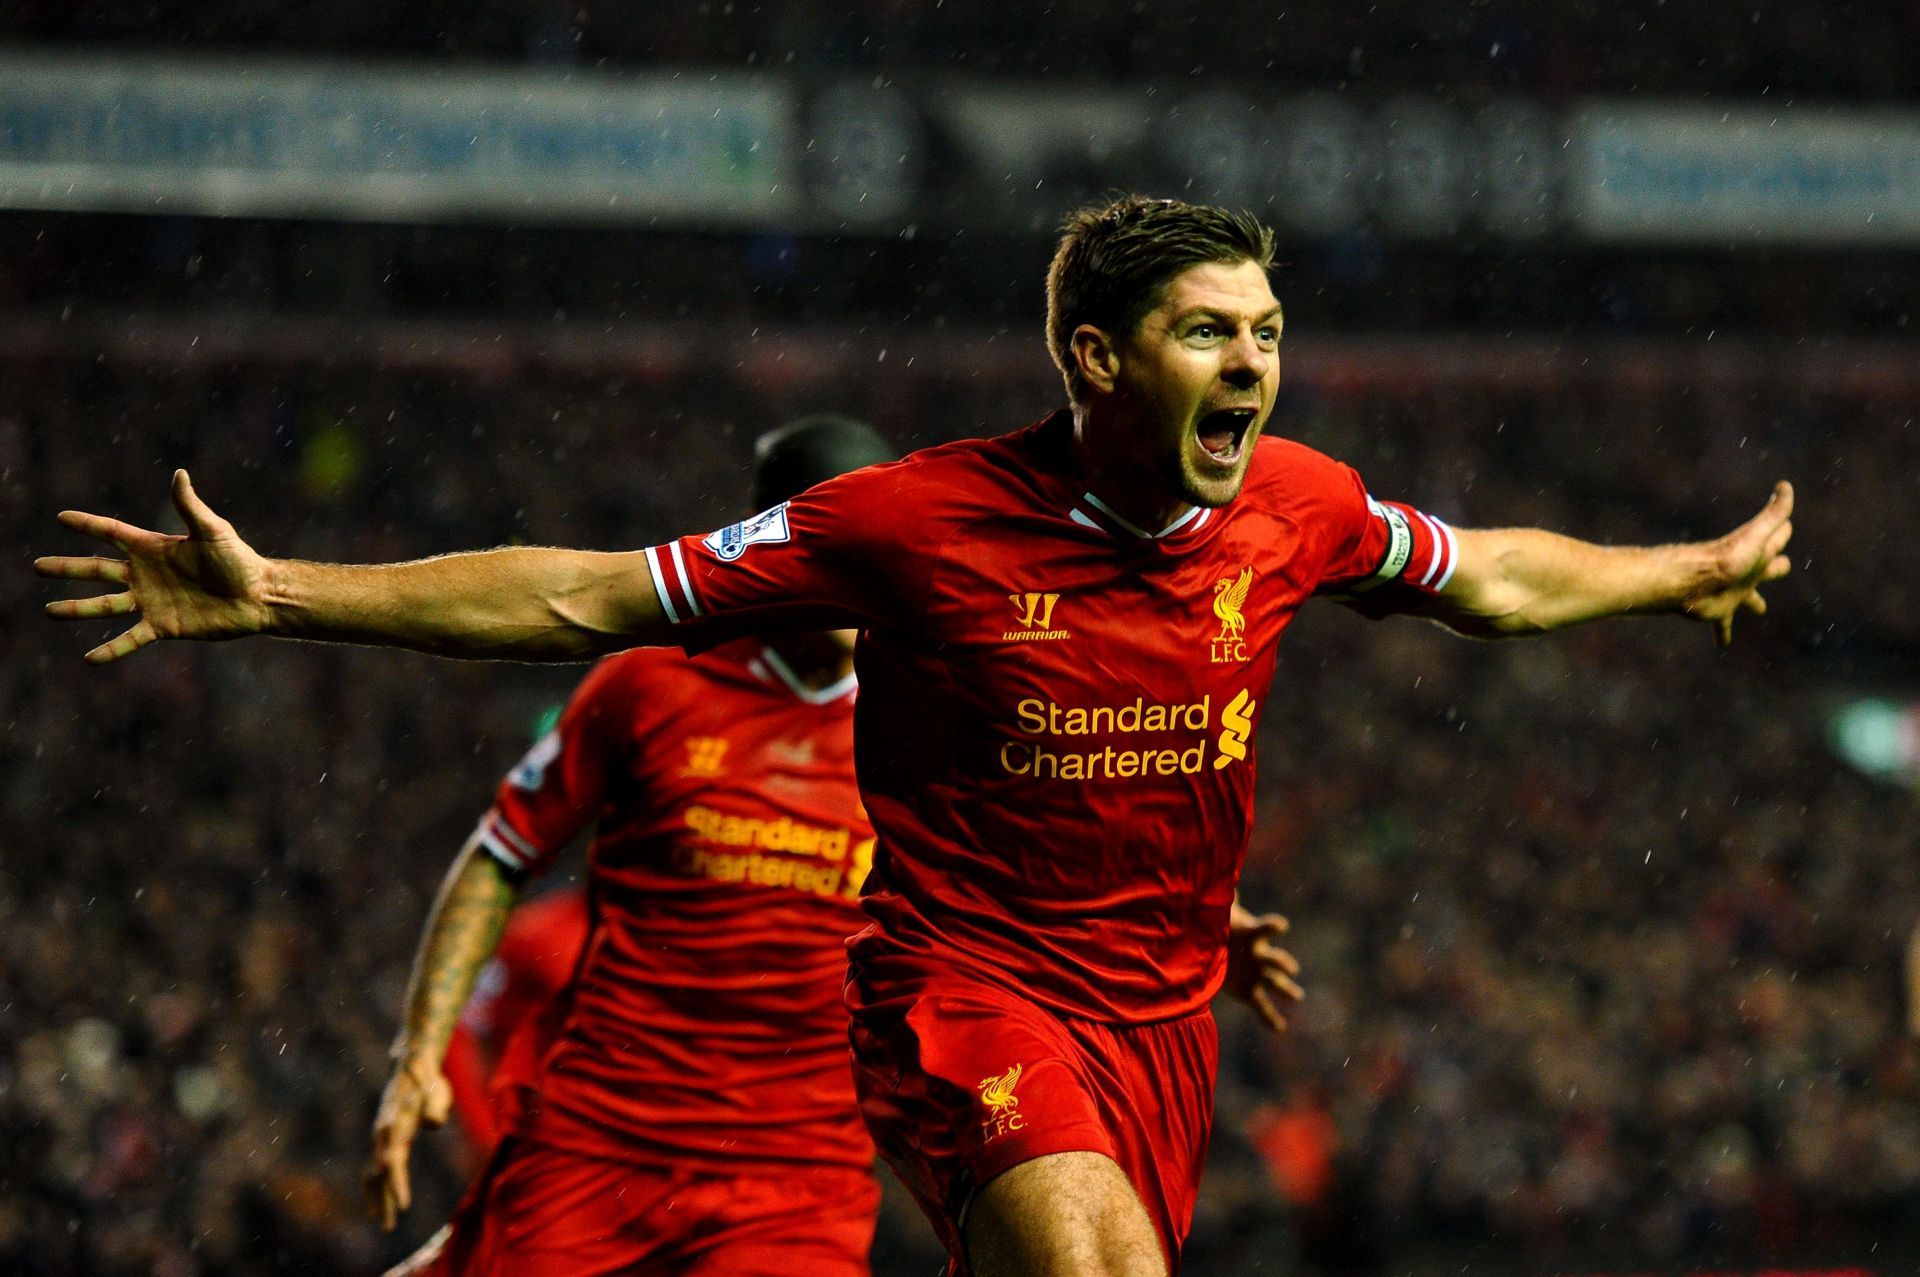 Steve Gerrard celebrates one of his 185 goals for Liverpool.